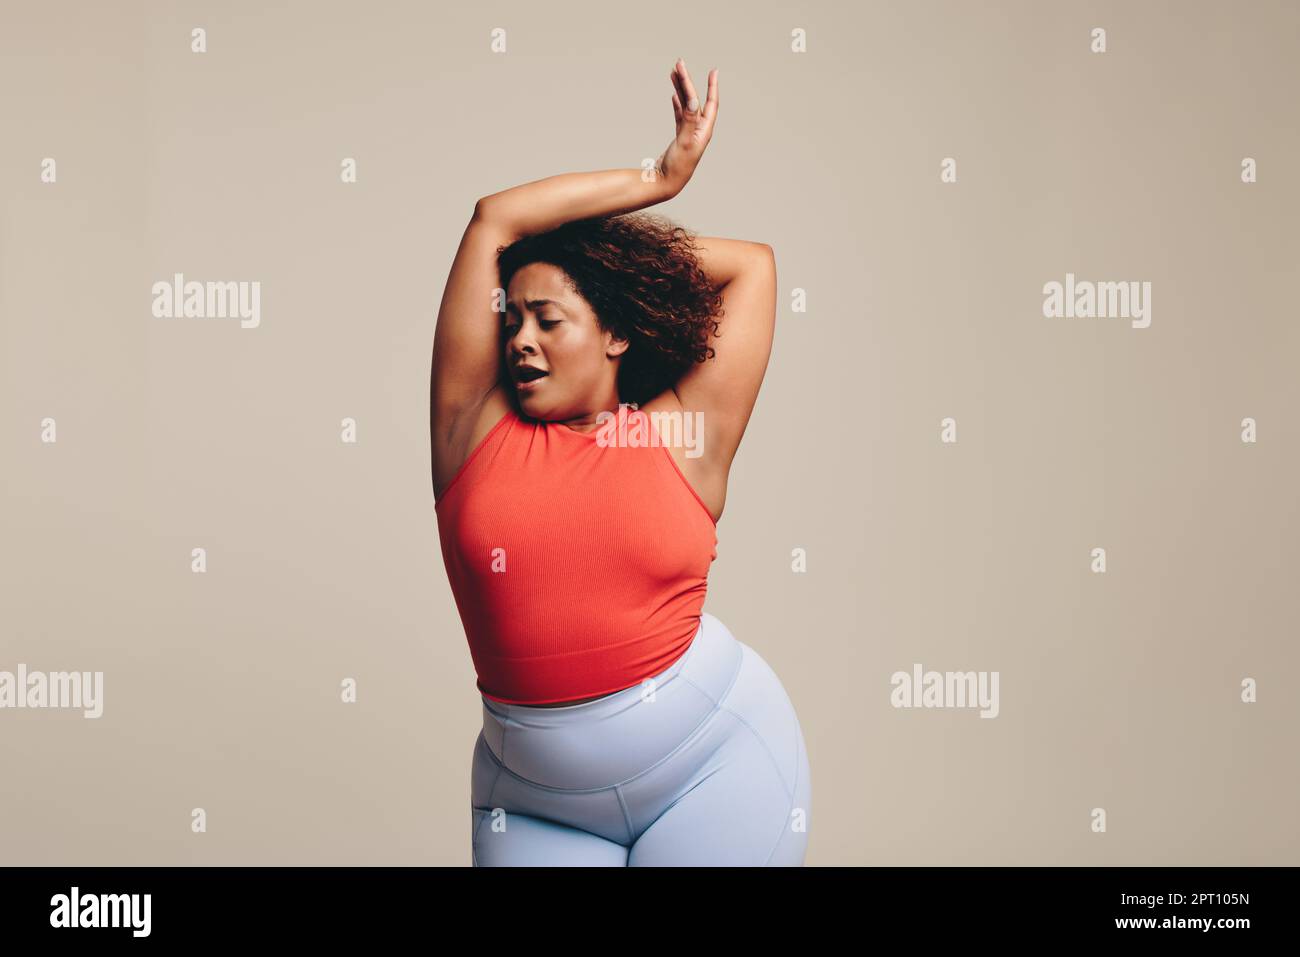 Fit woman with curves relishing in a dance workout, an expressive form of physical activity, in a studio setting. Woman celebrating her body, confiden Stock Photo